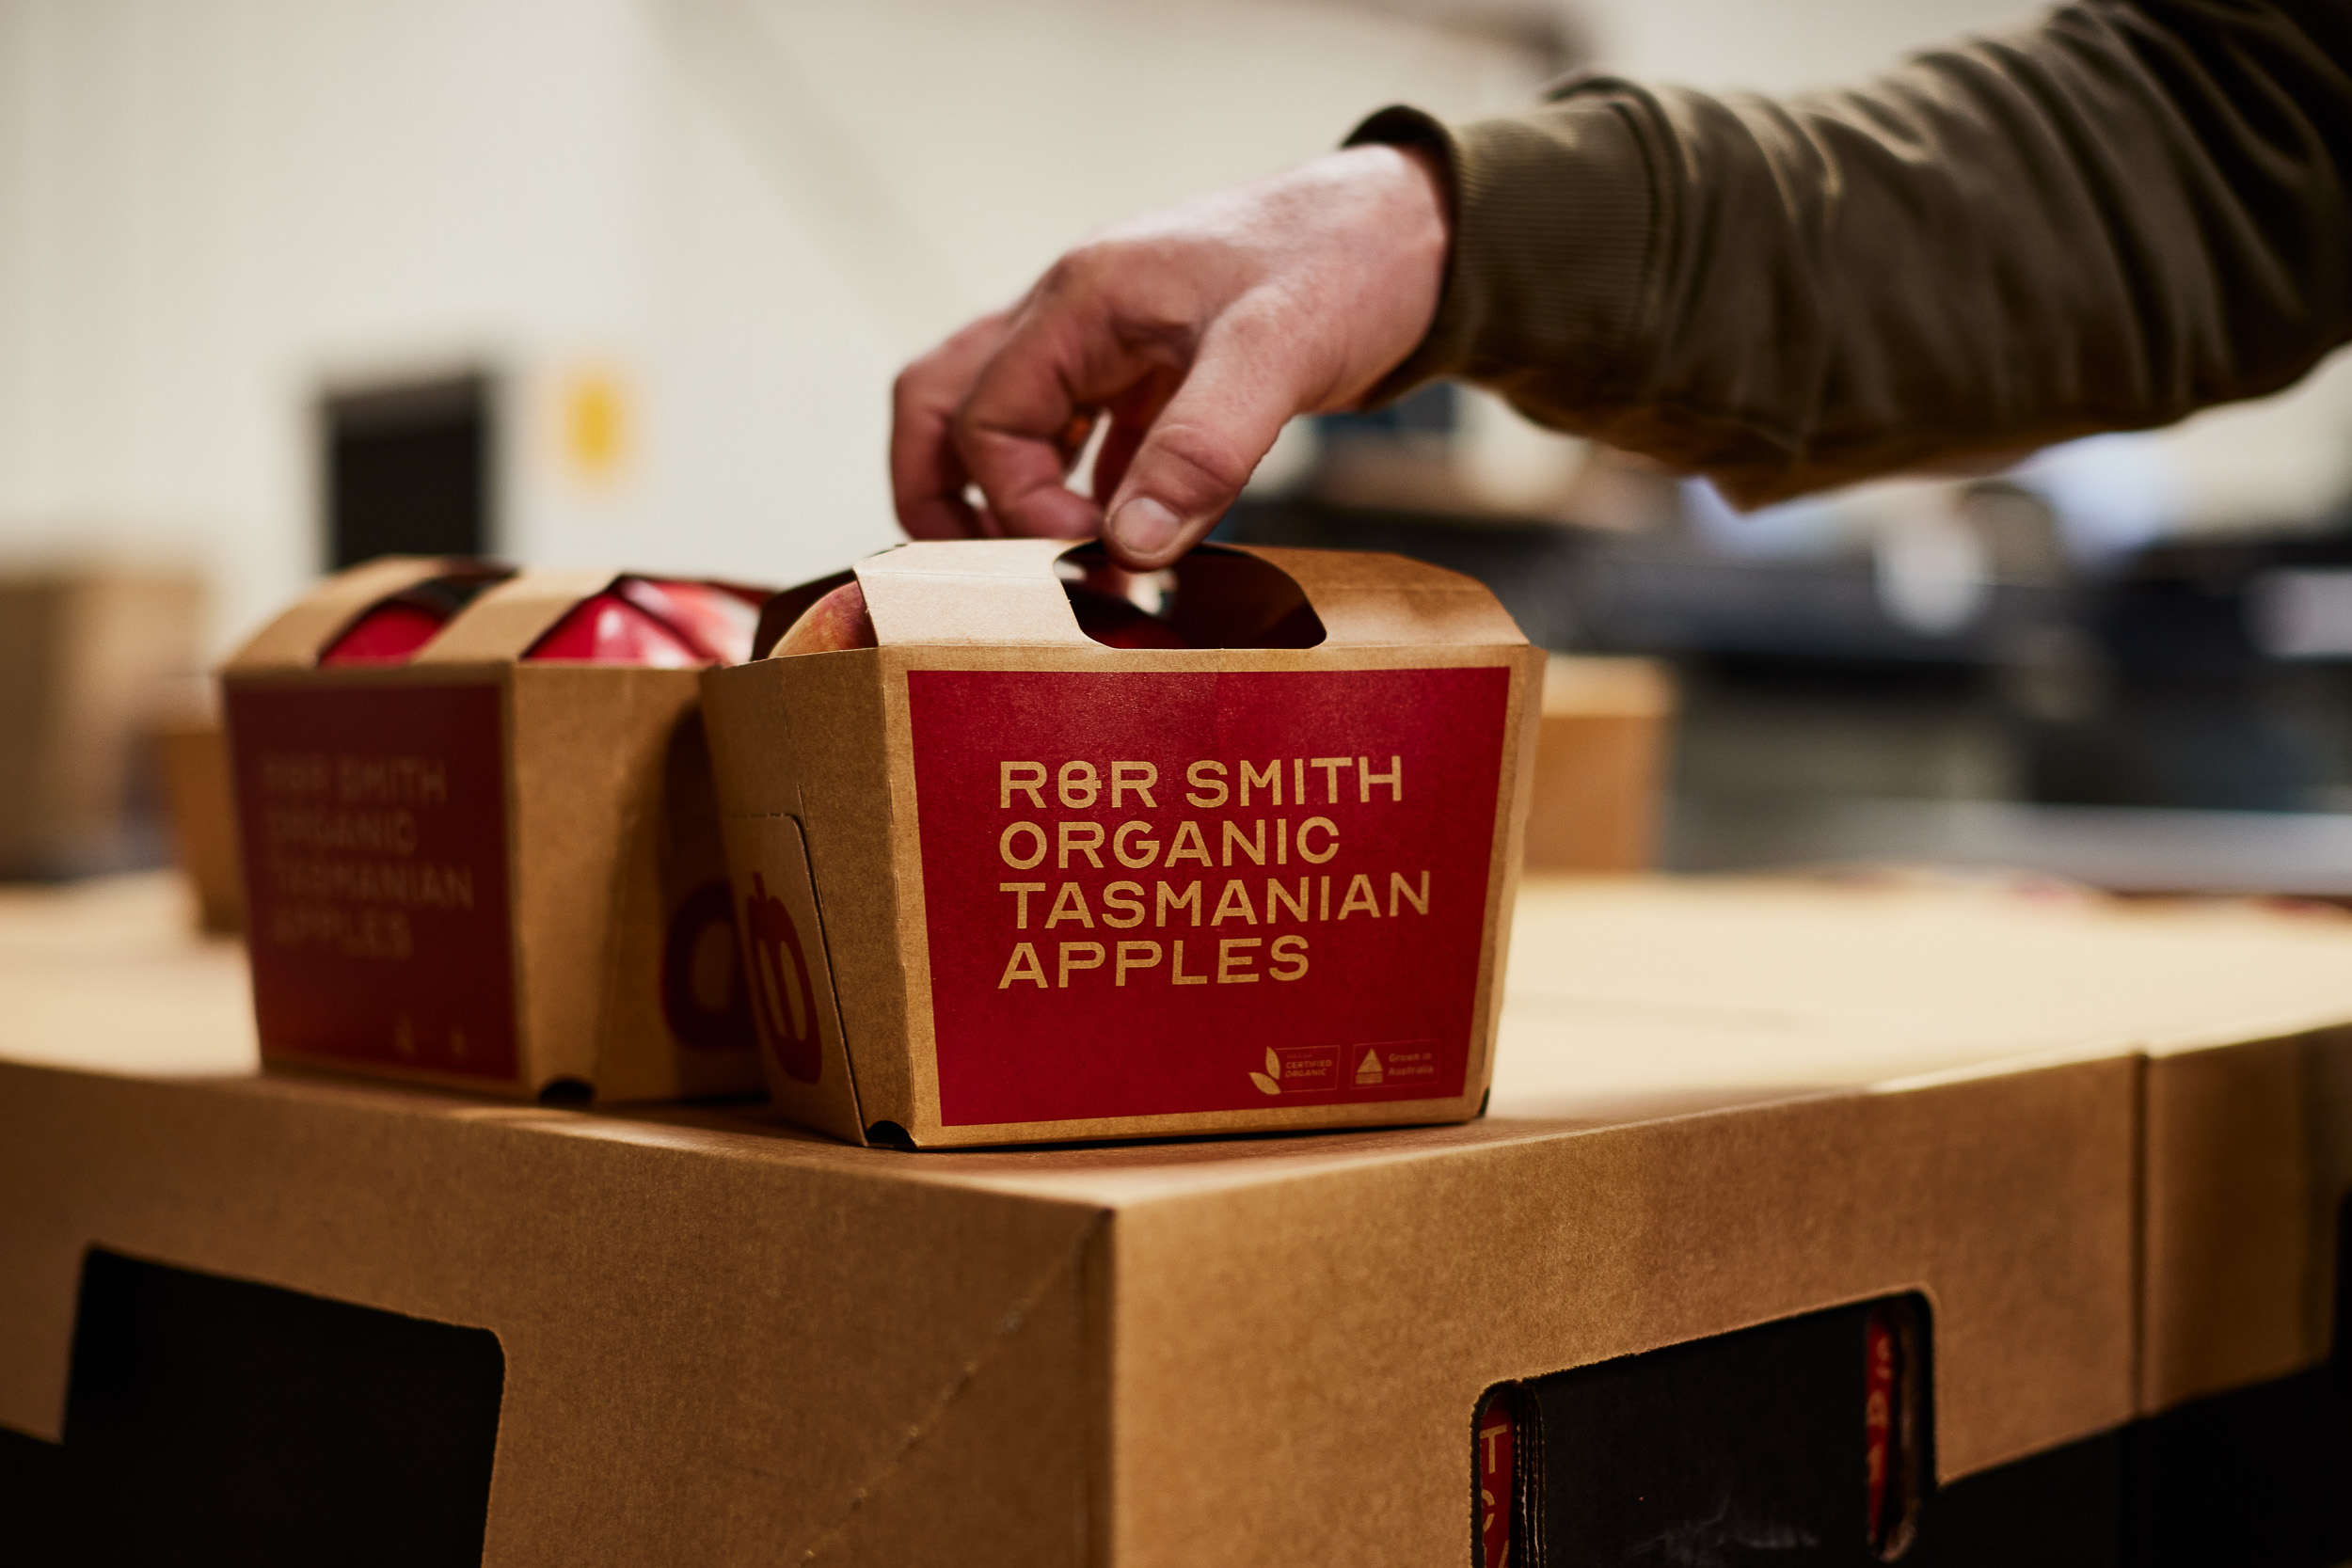 Apples in box R&R Smith